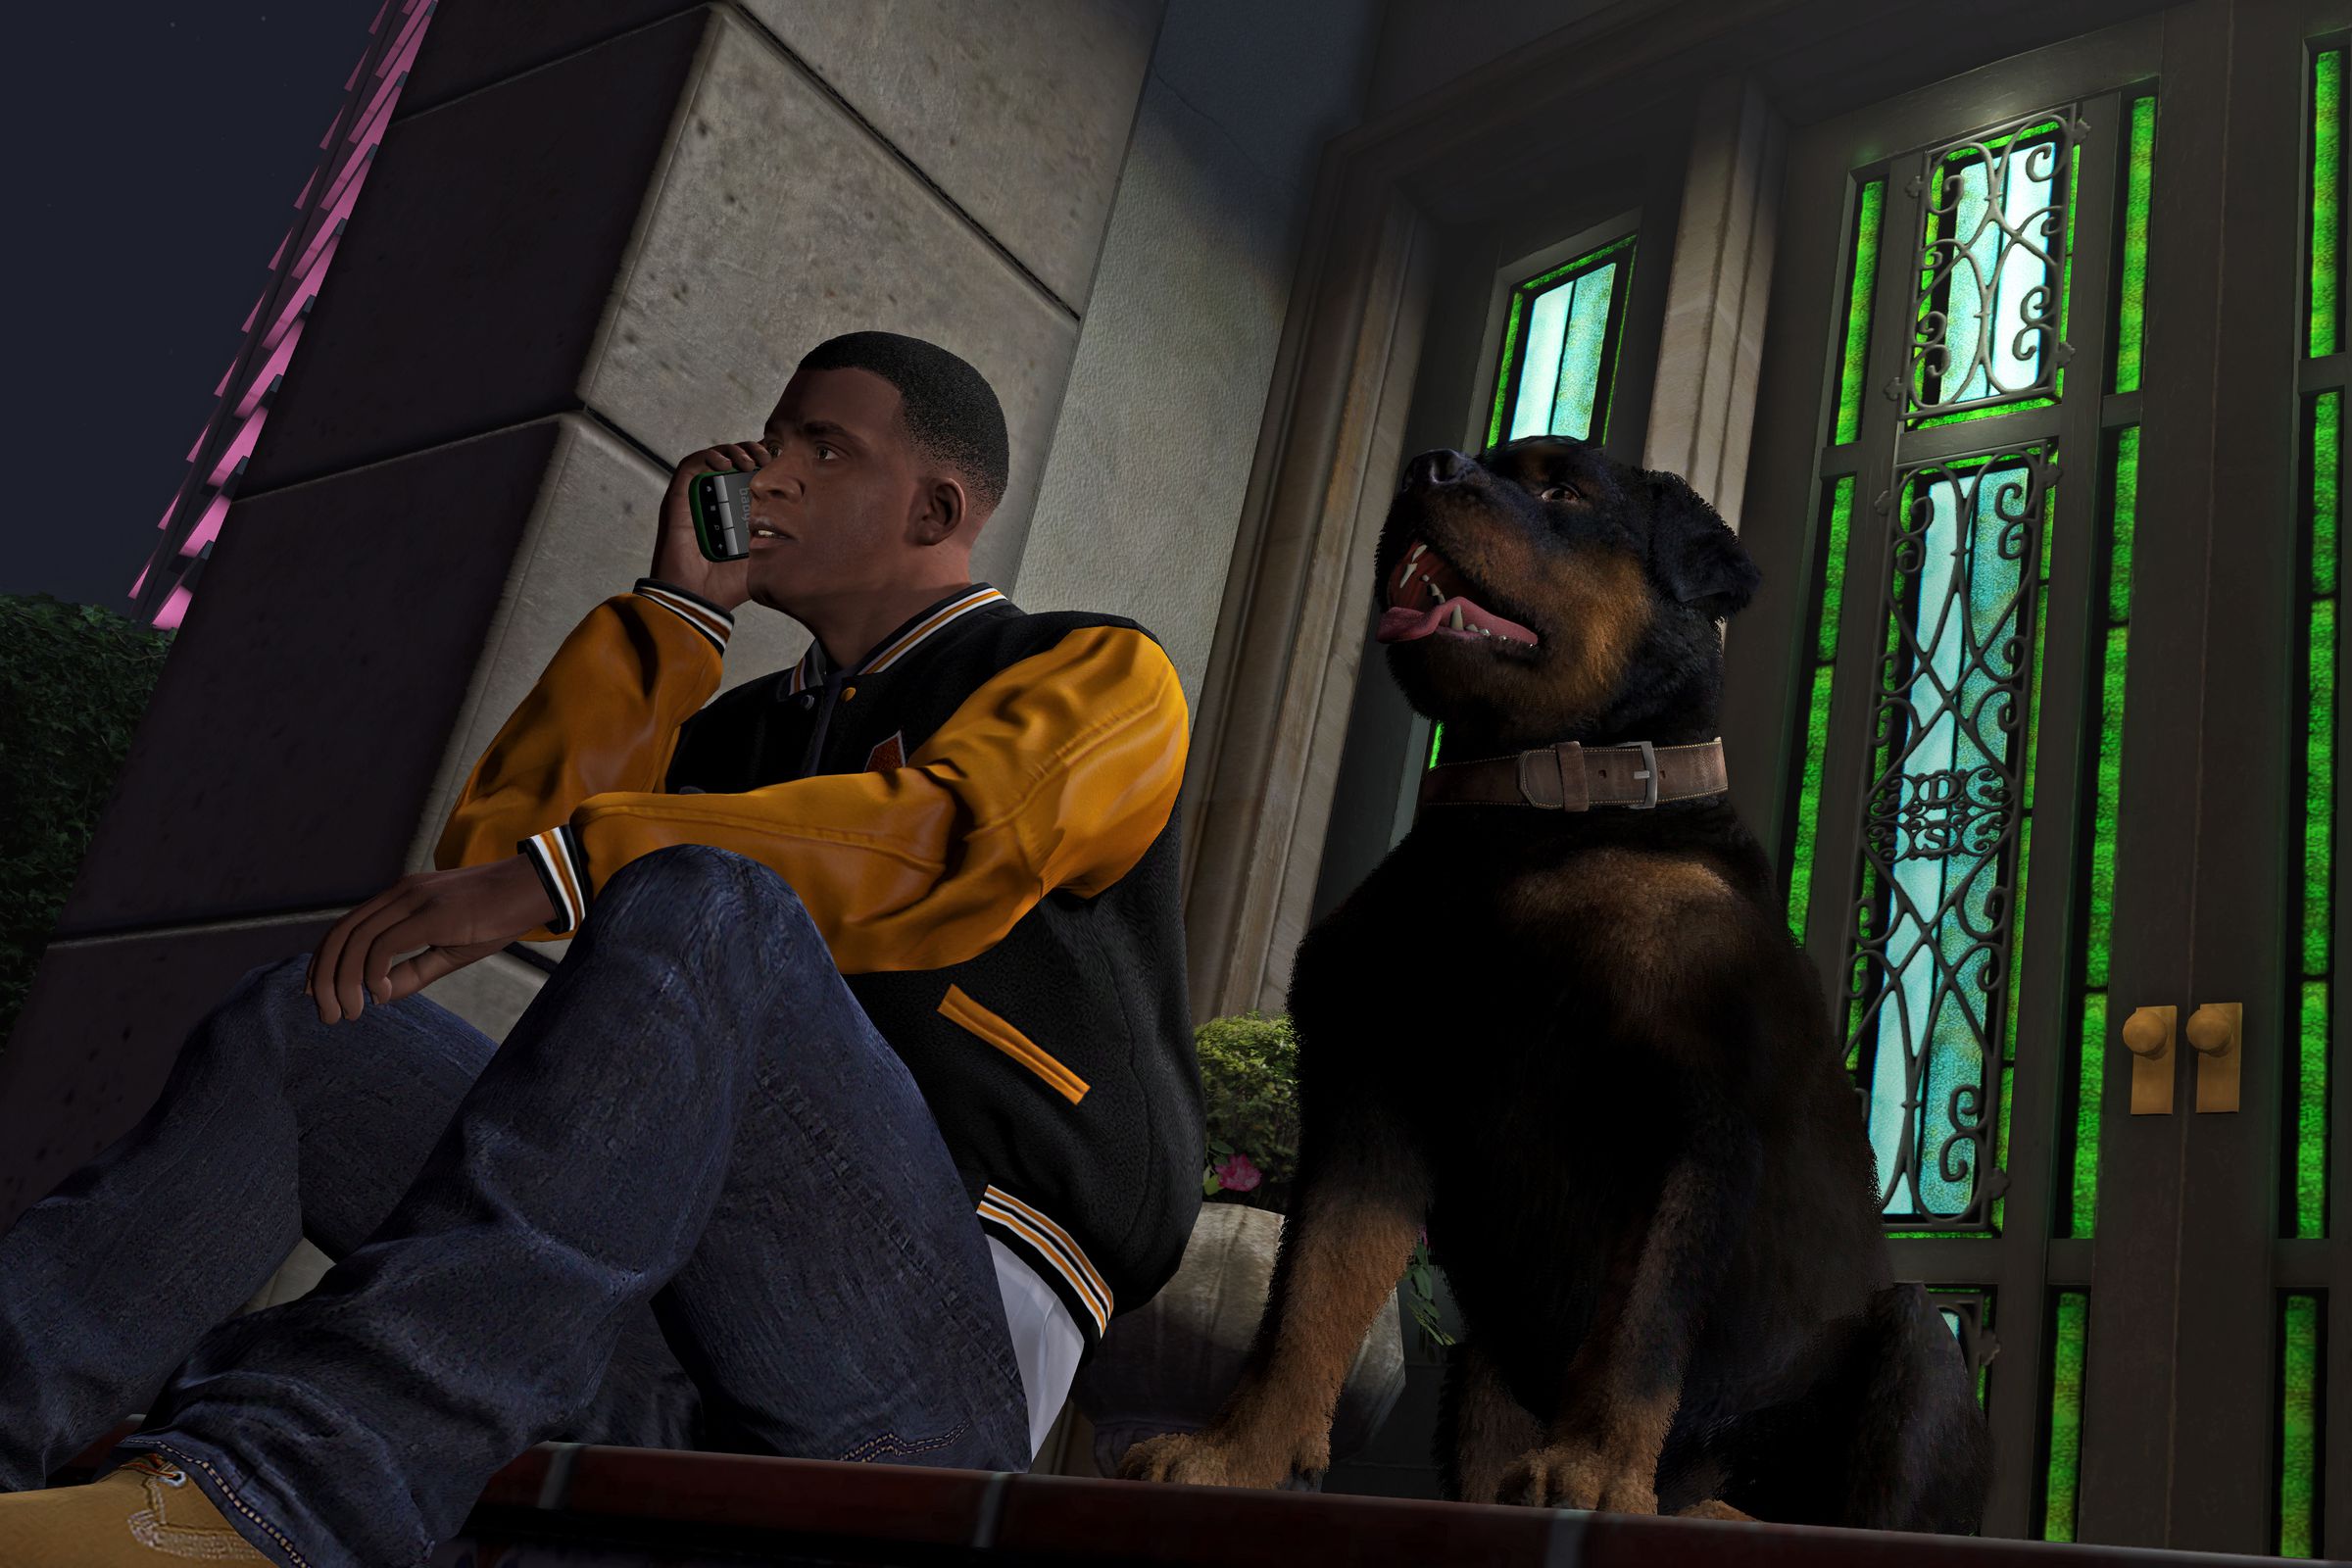 A screenshot from Grand Theft Auto V.